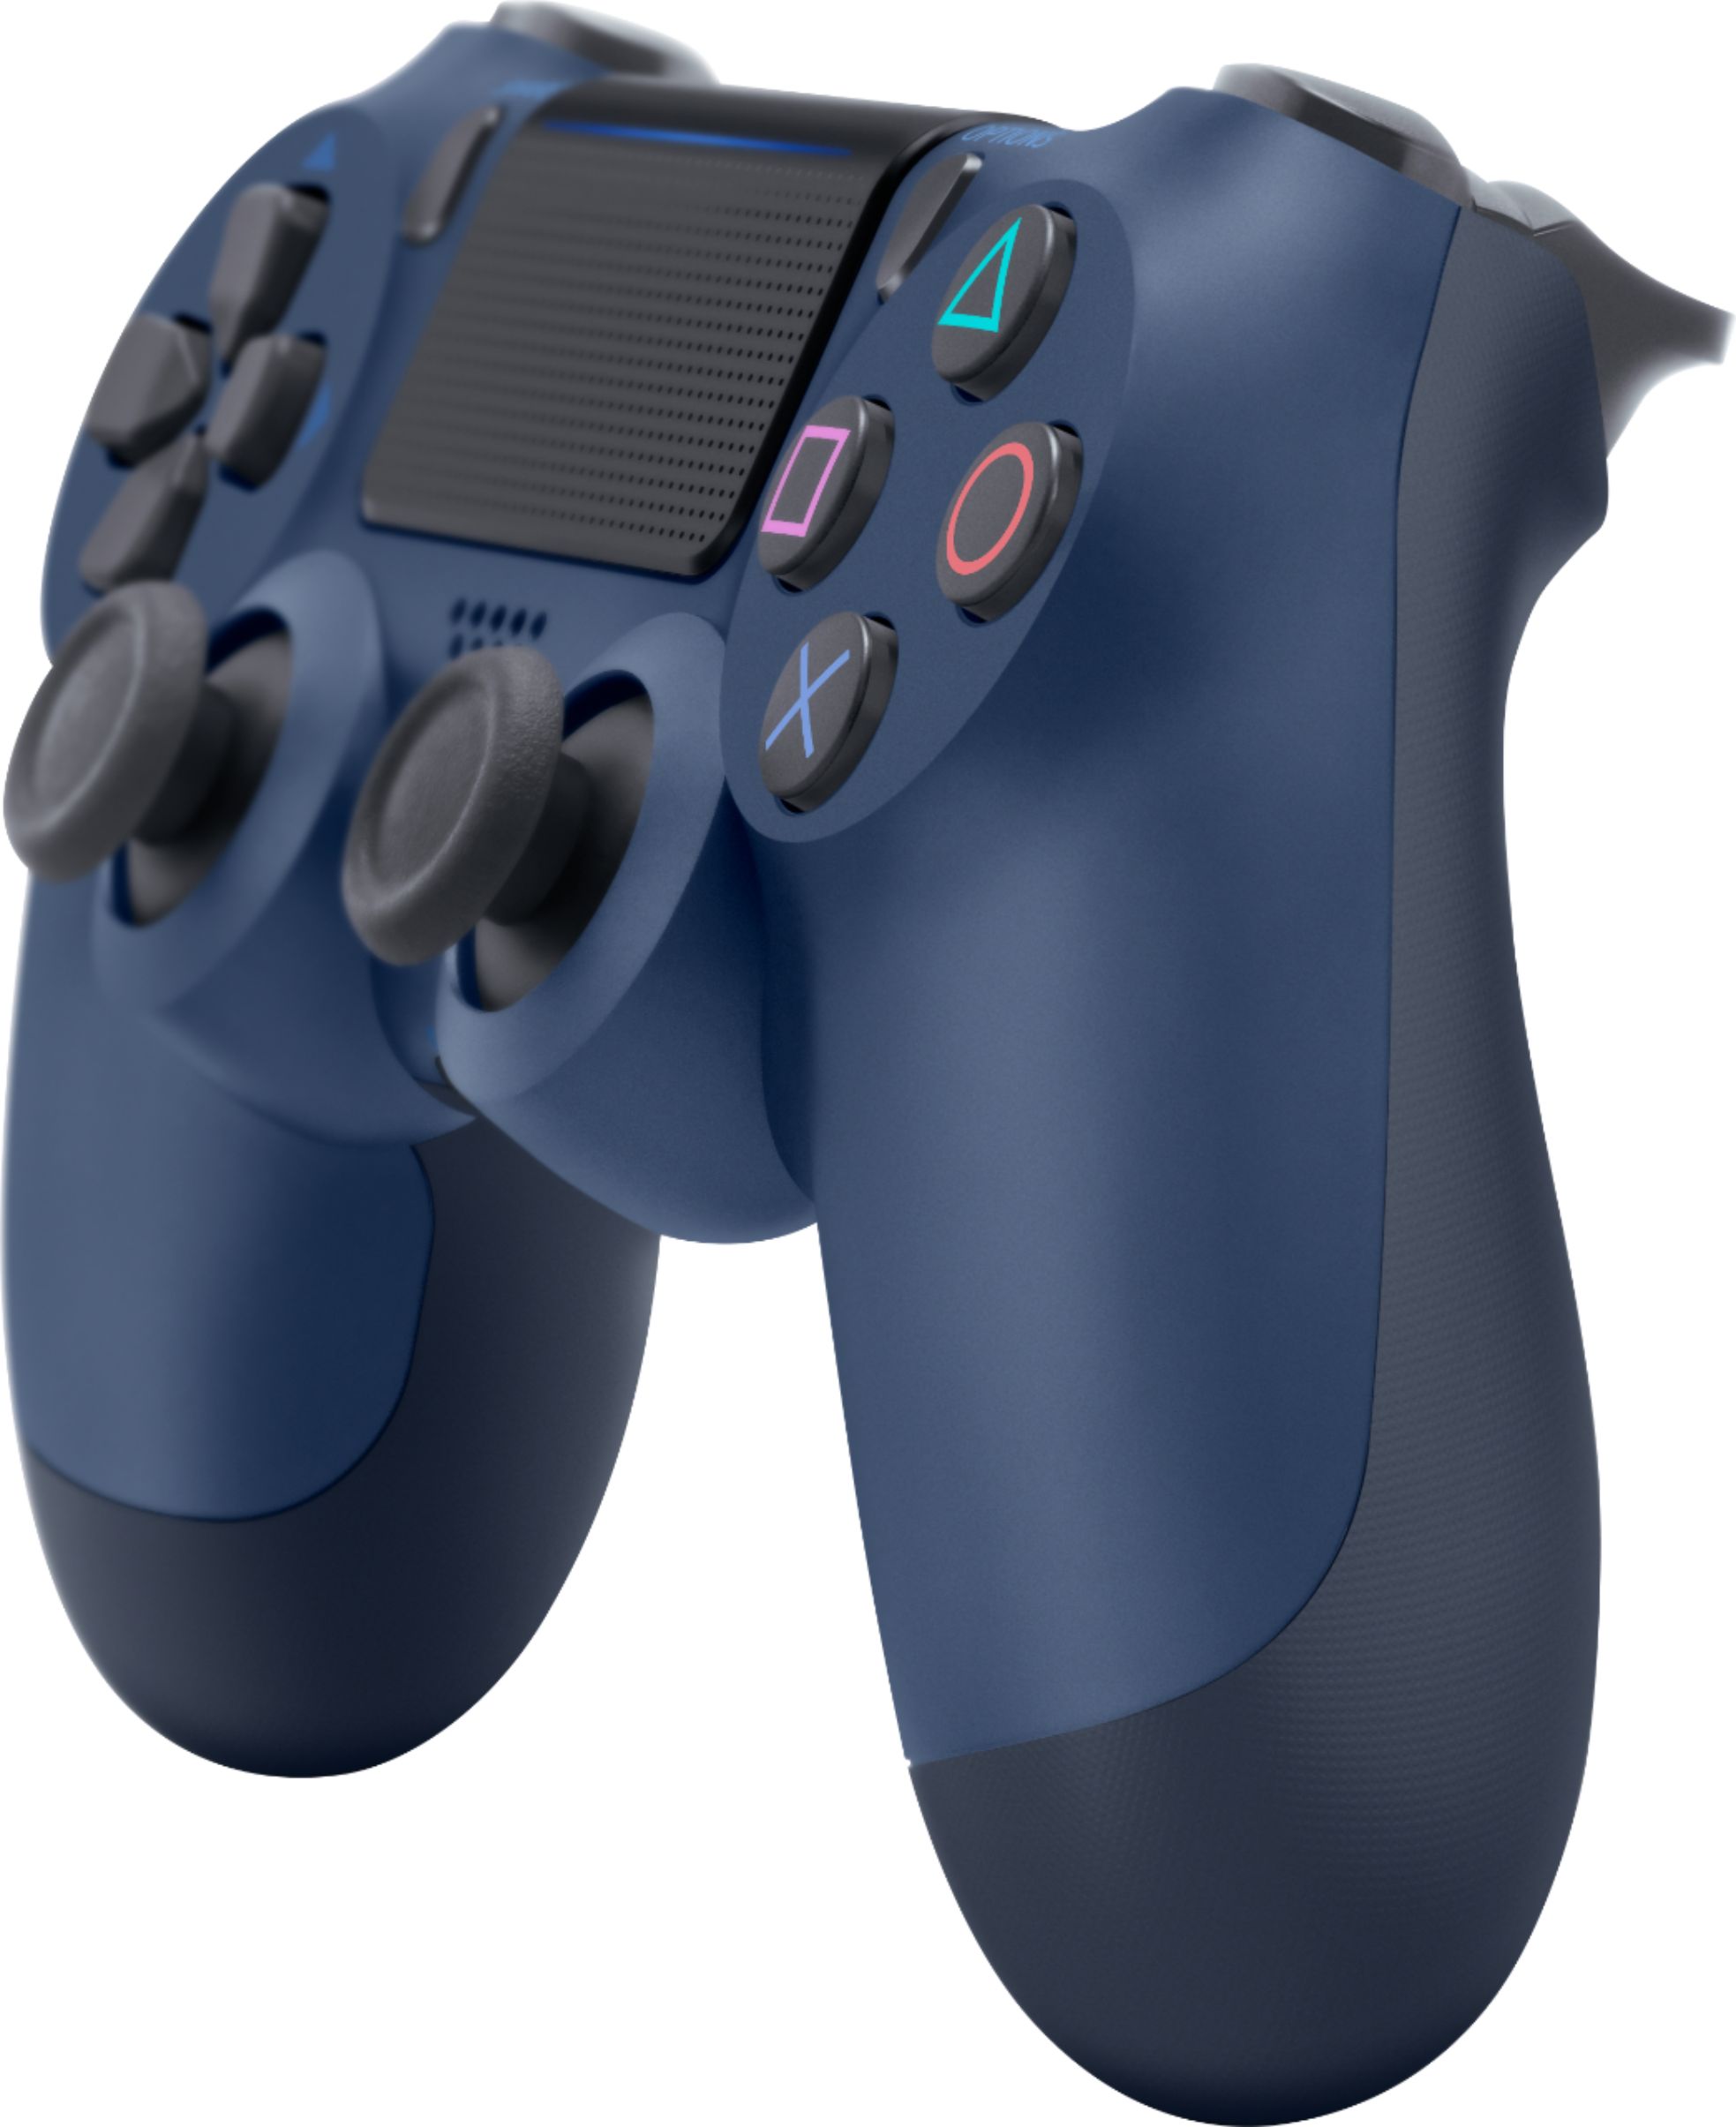 Left View: Sony - Geek Squad Certified Refurbished DualShock 4 Wireless Controller for PlayStation 4 - Midnight Blue